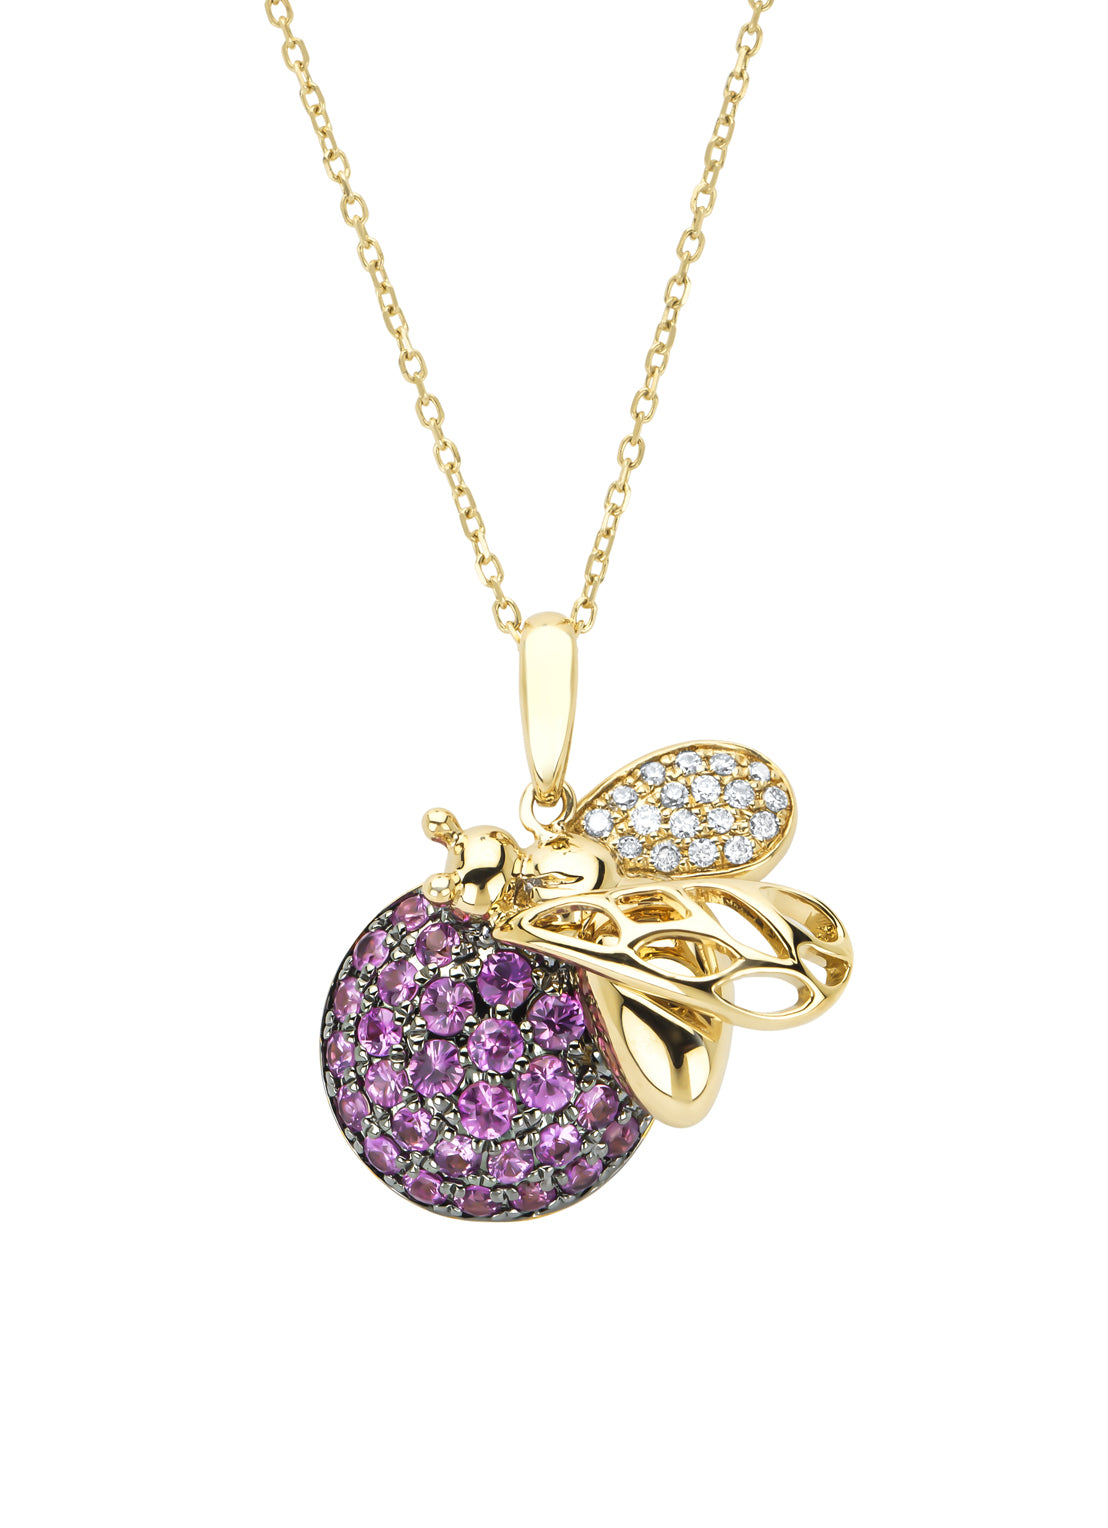 Yellow gold pendant with necklace, 0.58 ct pink sapphire, Queen Bee